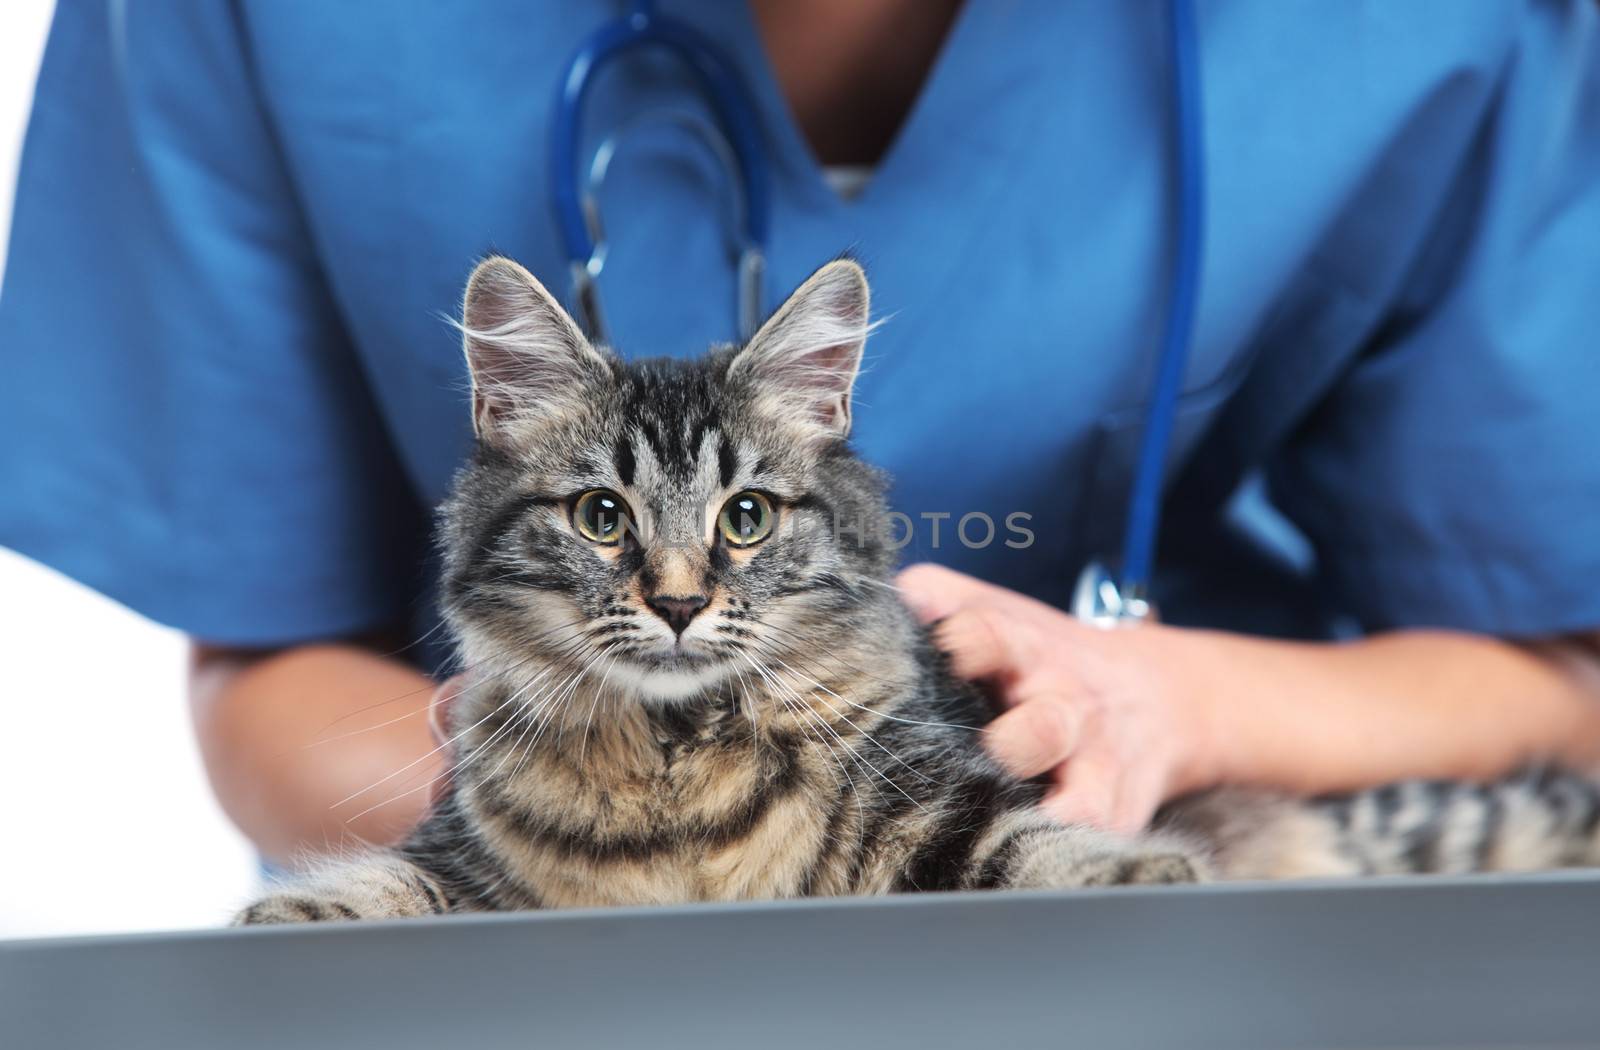 Veterinary caring of a cute cat by stokkete